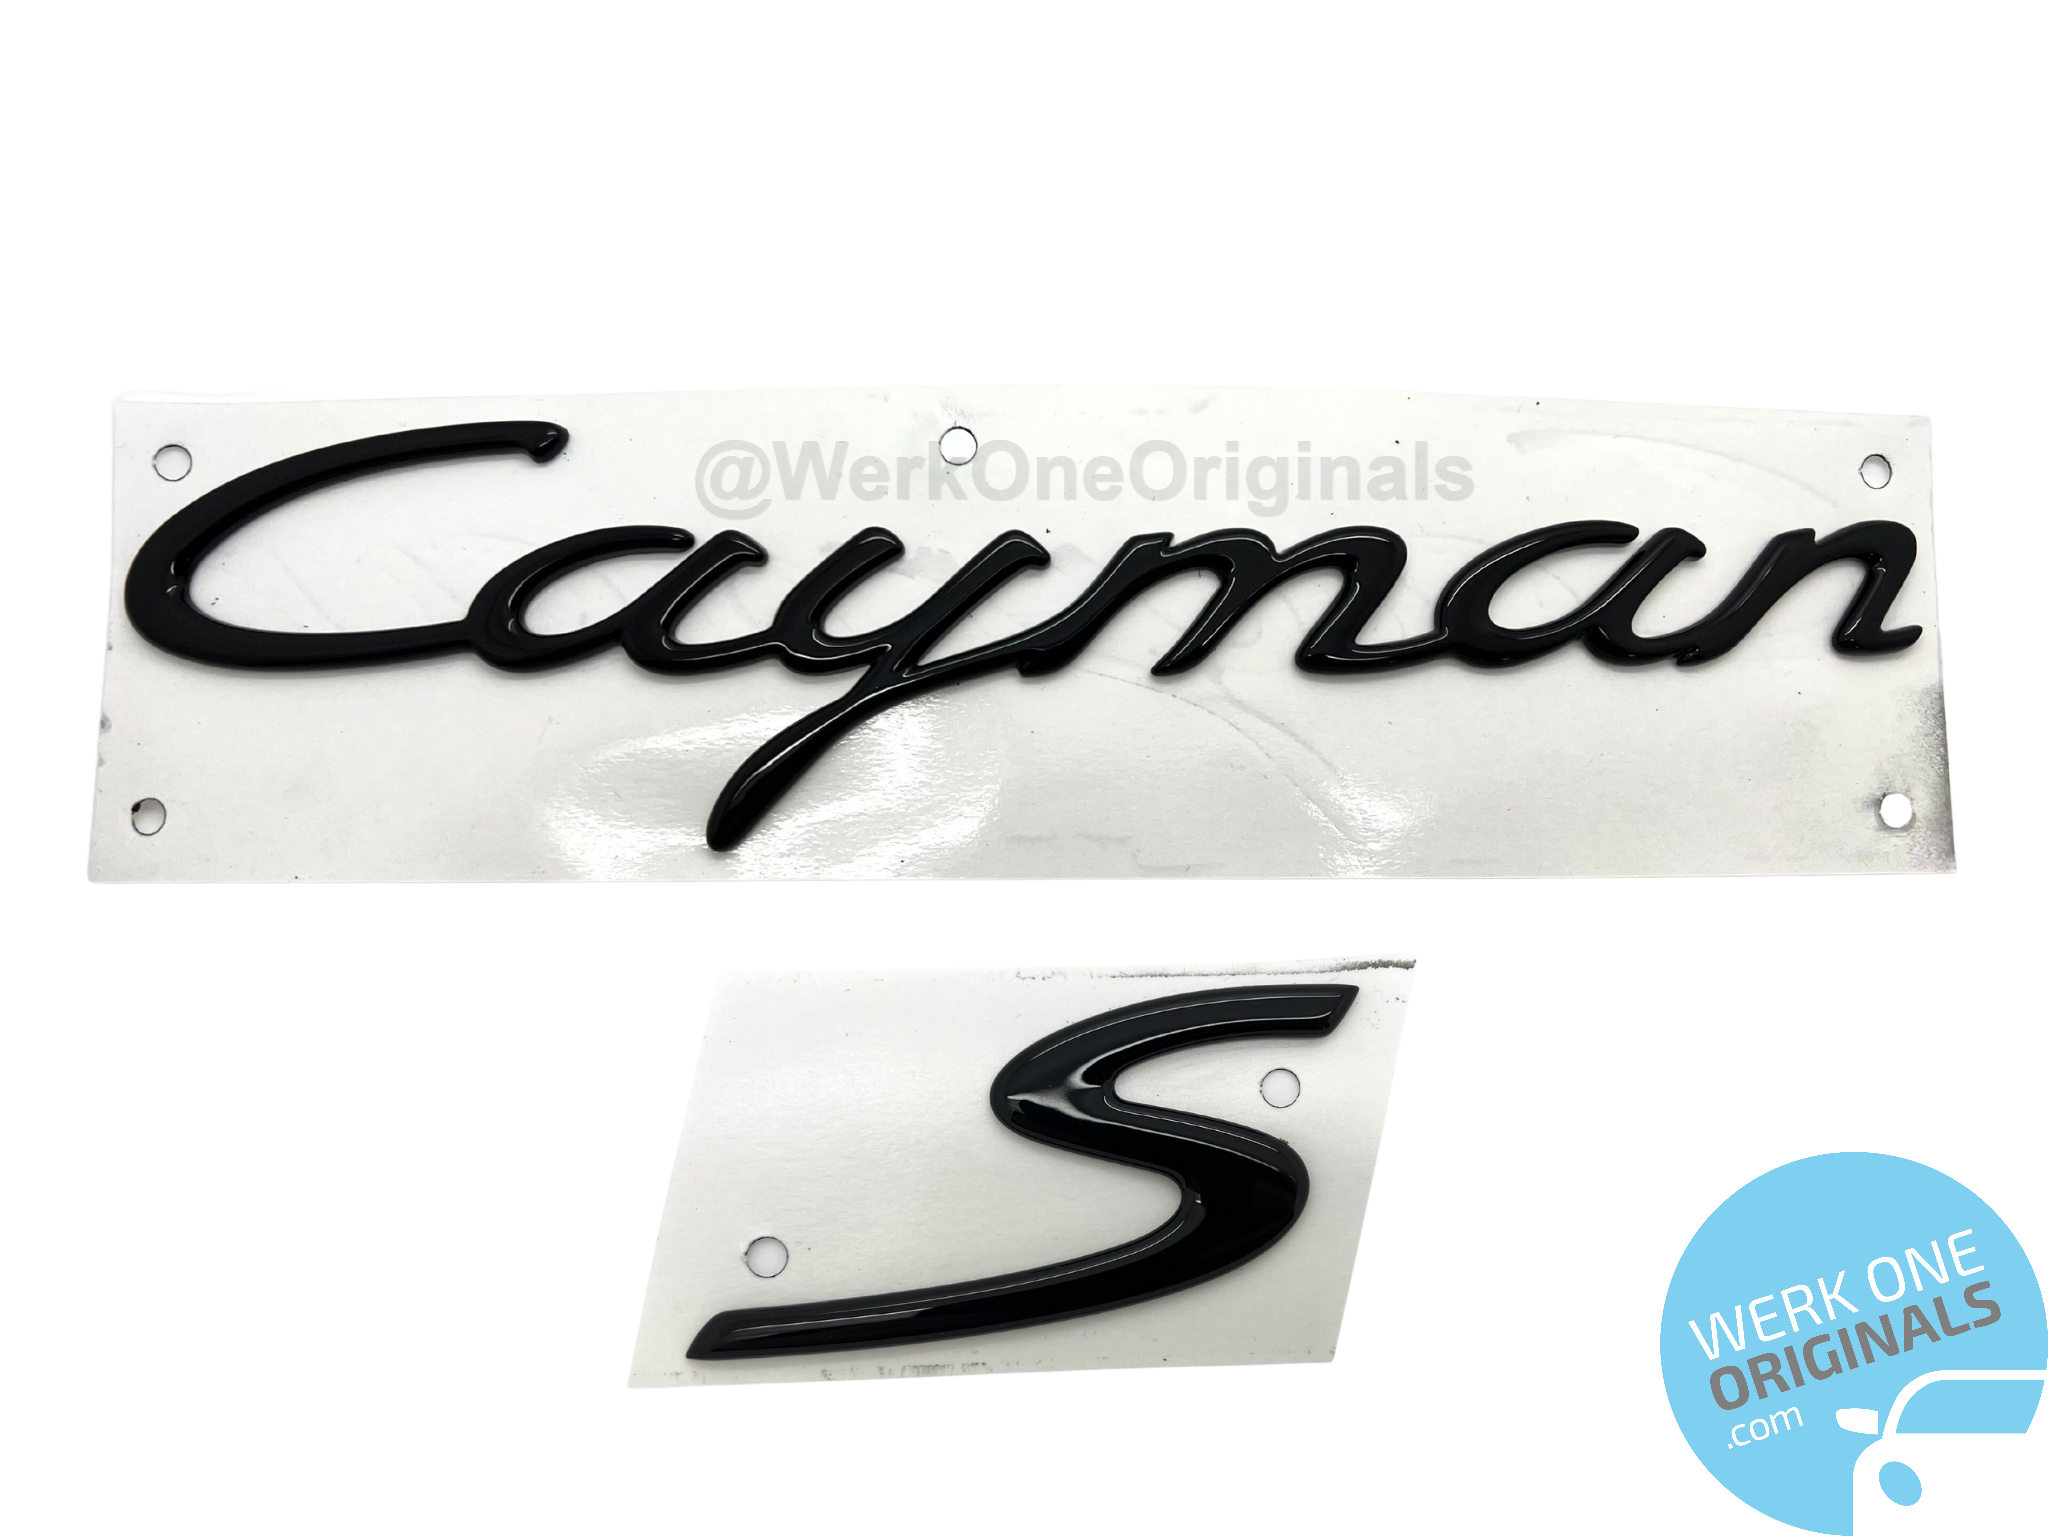 Porsche Official 'Cayman S' Gloss Black Rear Badge Decal for Cayman S Type 987 Models